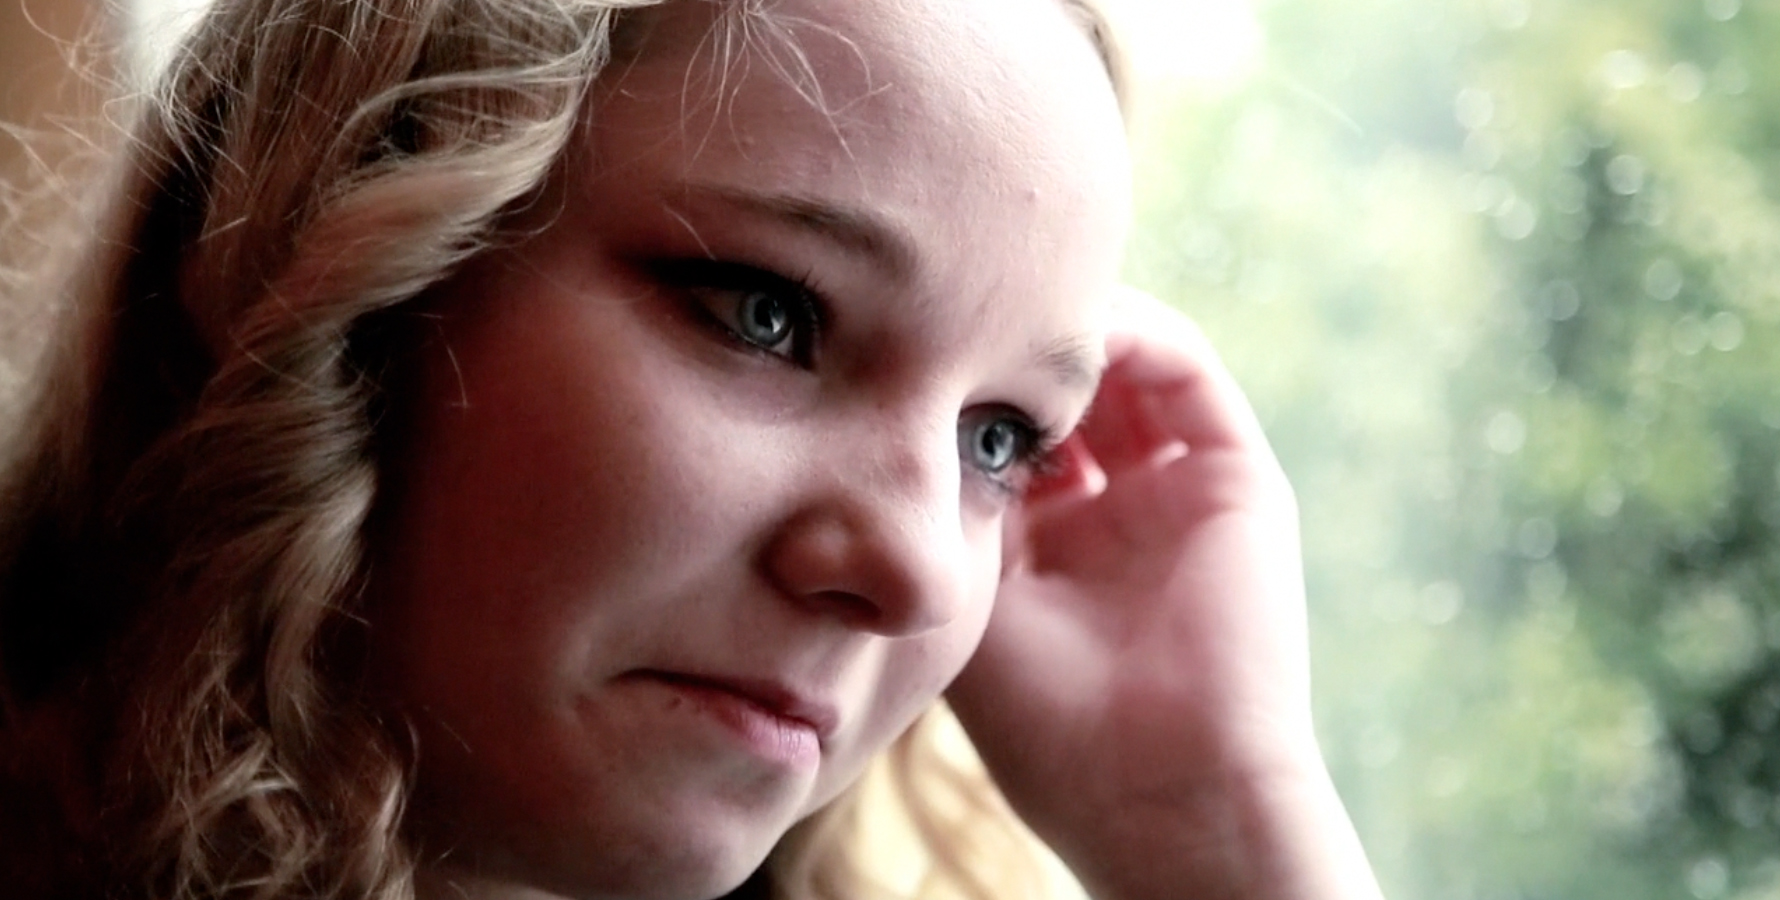 Erin St Pierre acts as the emotional Jen in the short film 'Lost'